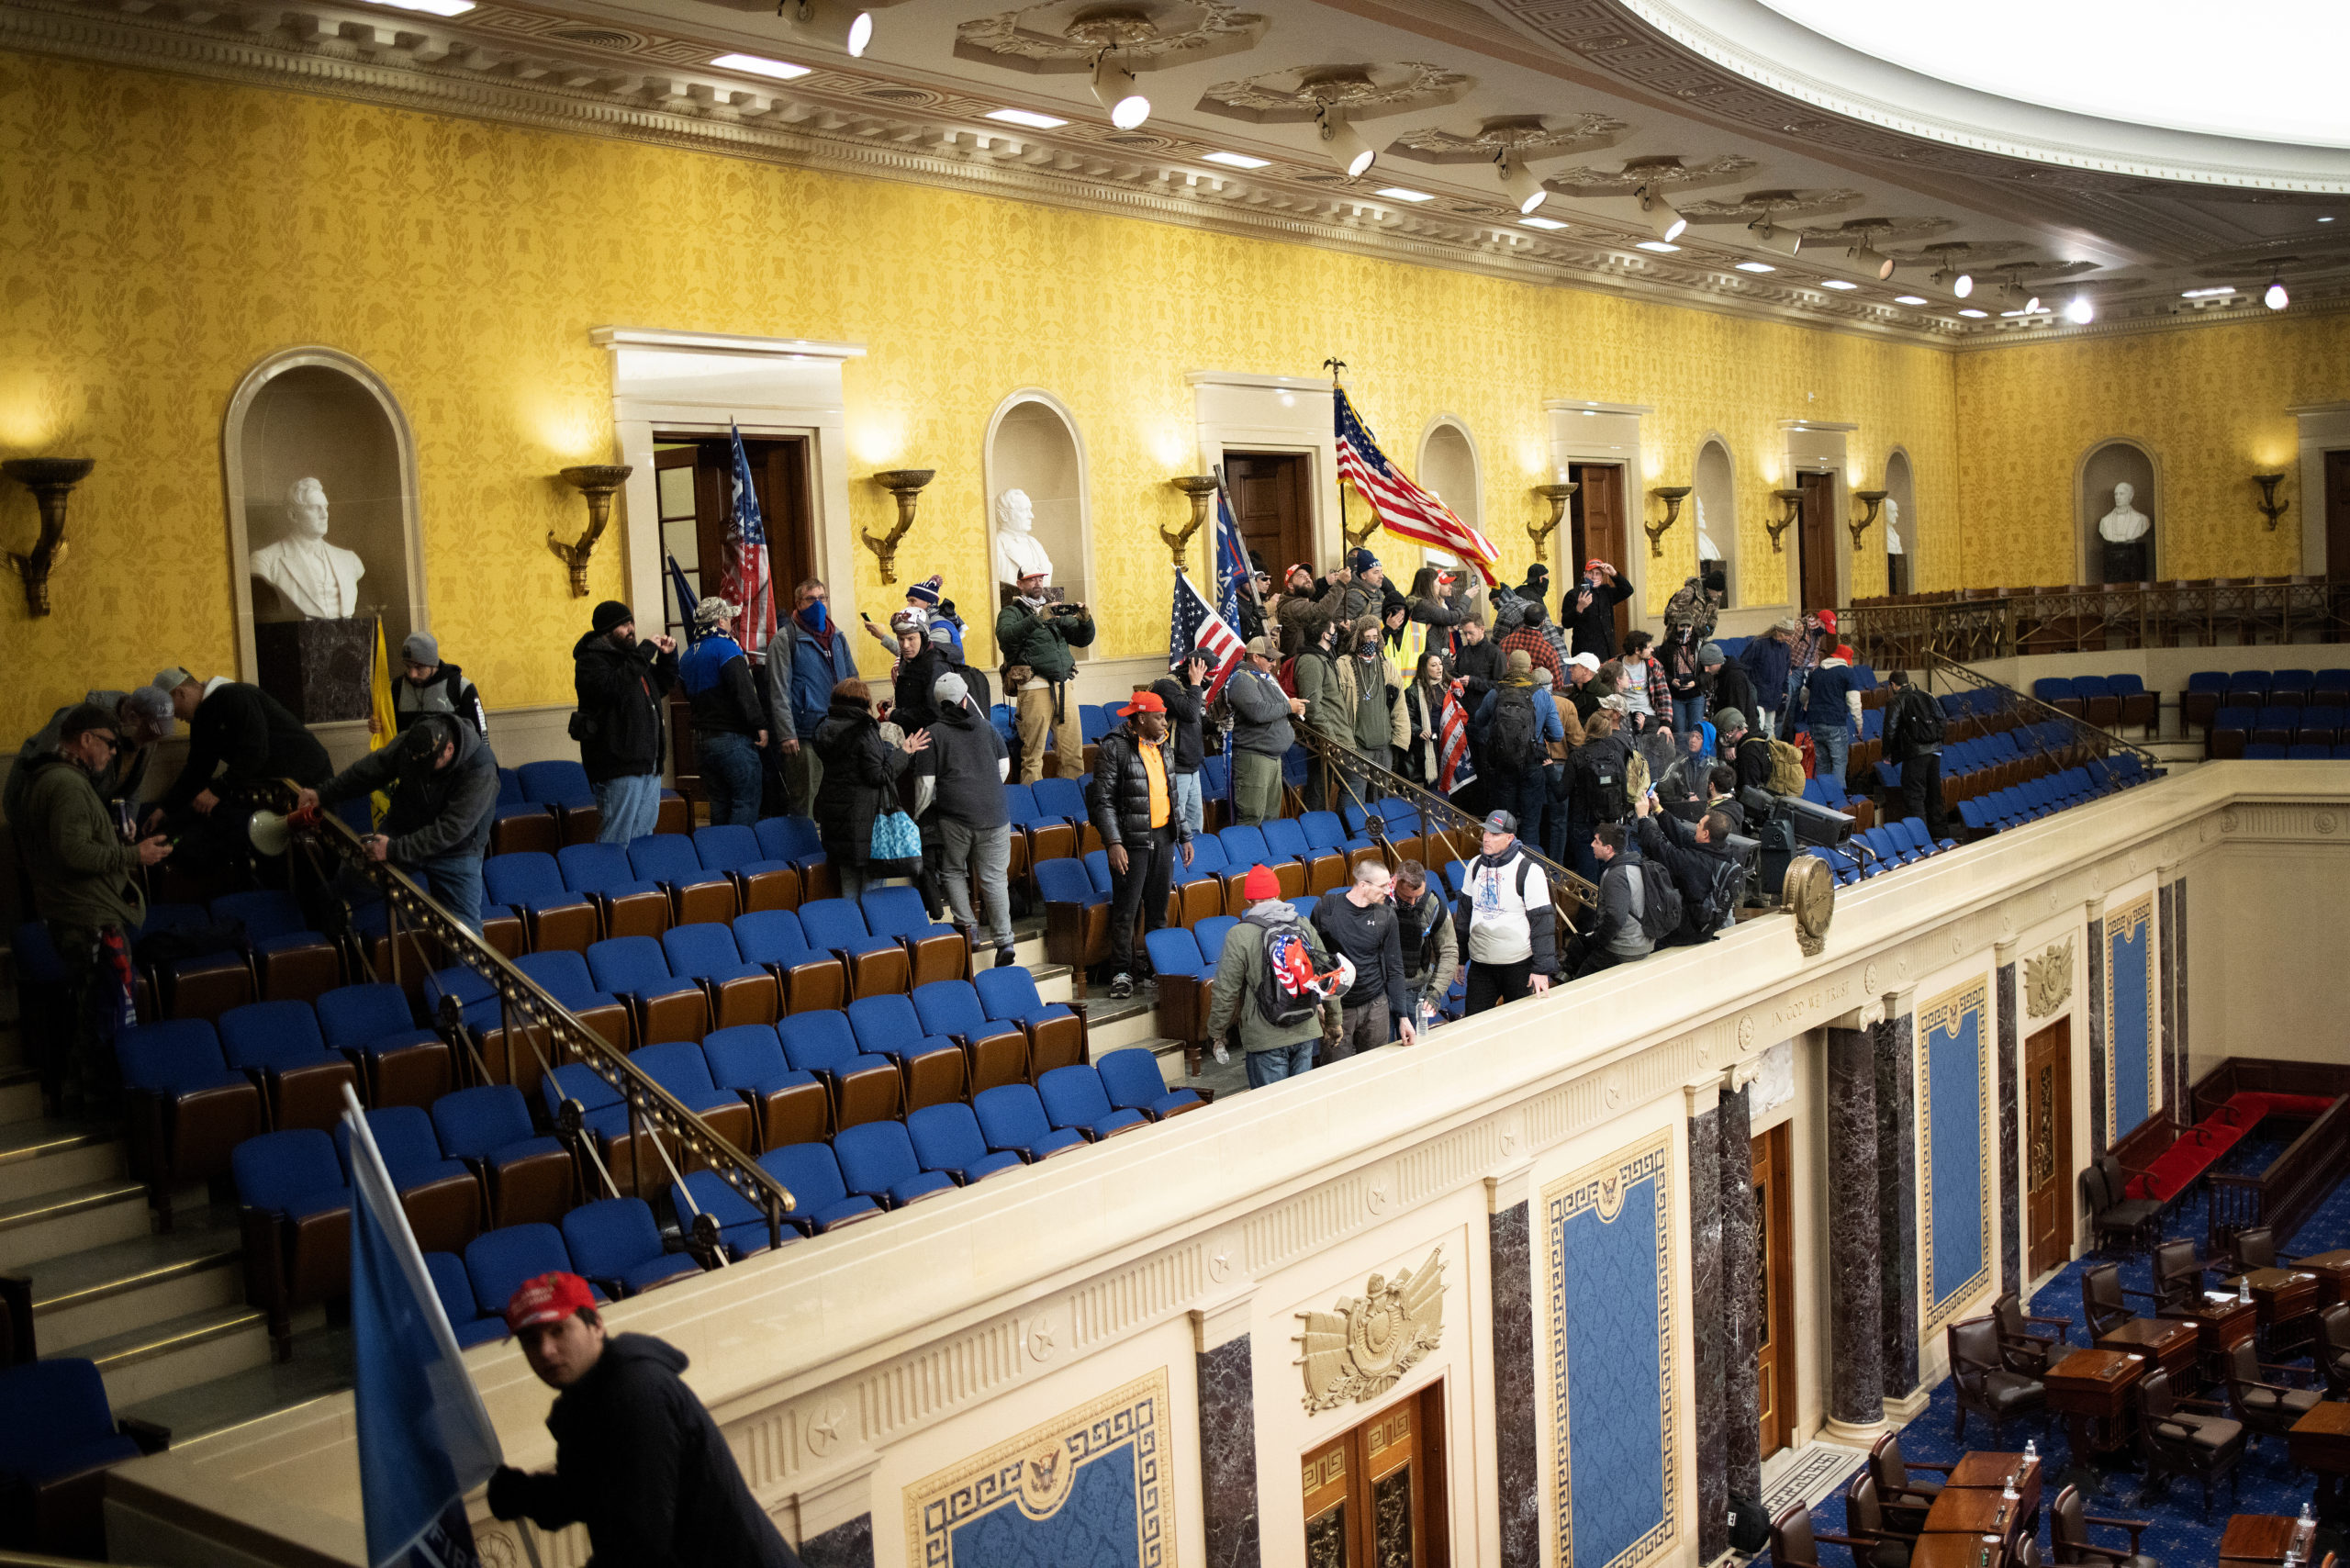 WASHINGTON, DC - JANUARY 06: A pro-Trump mob gathers inside the Senate chamber in the U.S. Capitol after groups stormed the building on January 06, 2021 in Washington, DC. Congress held a joint session today to ratify President-elect Joe Biden's 306-232 Electoral College win over President Donald Trump. A group of Republican senators said they would reject the Electoral College votes of several states unless Congress appointed a commission to audit the election results. (Photo by Win McNamee/Getty Images)